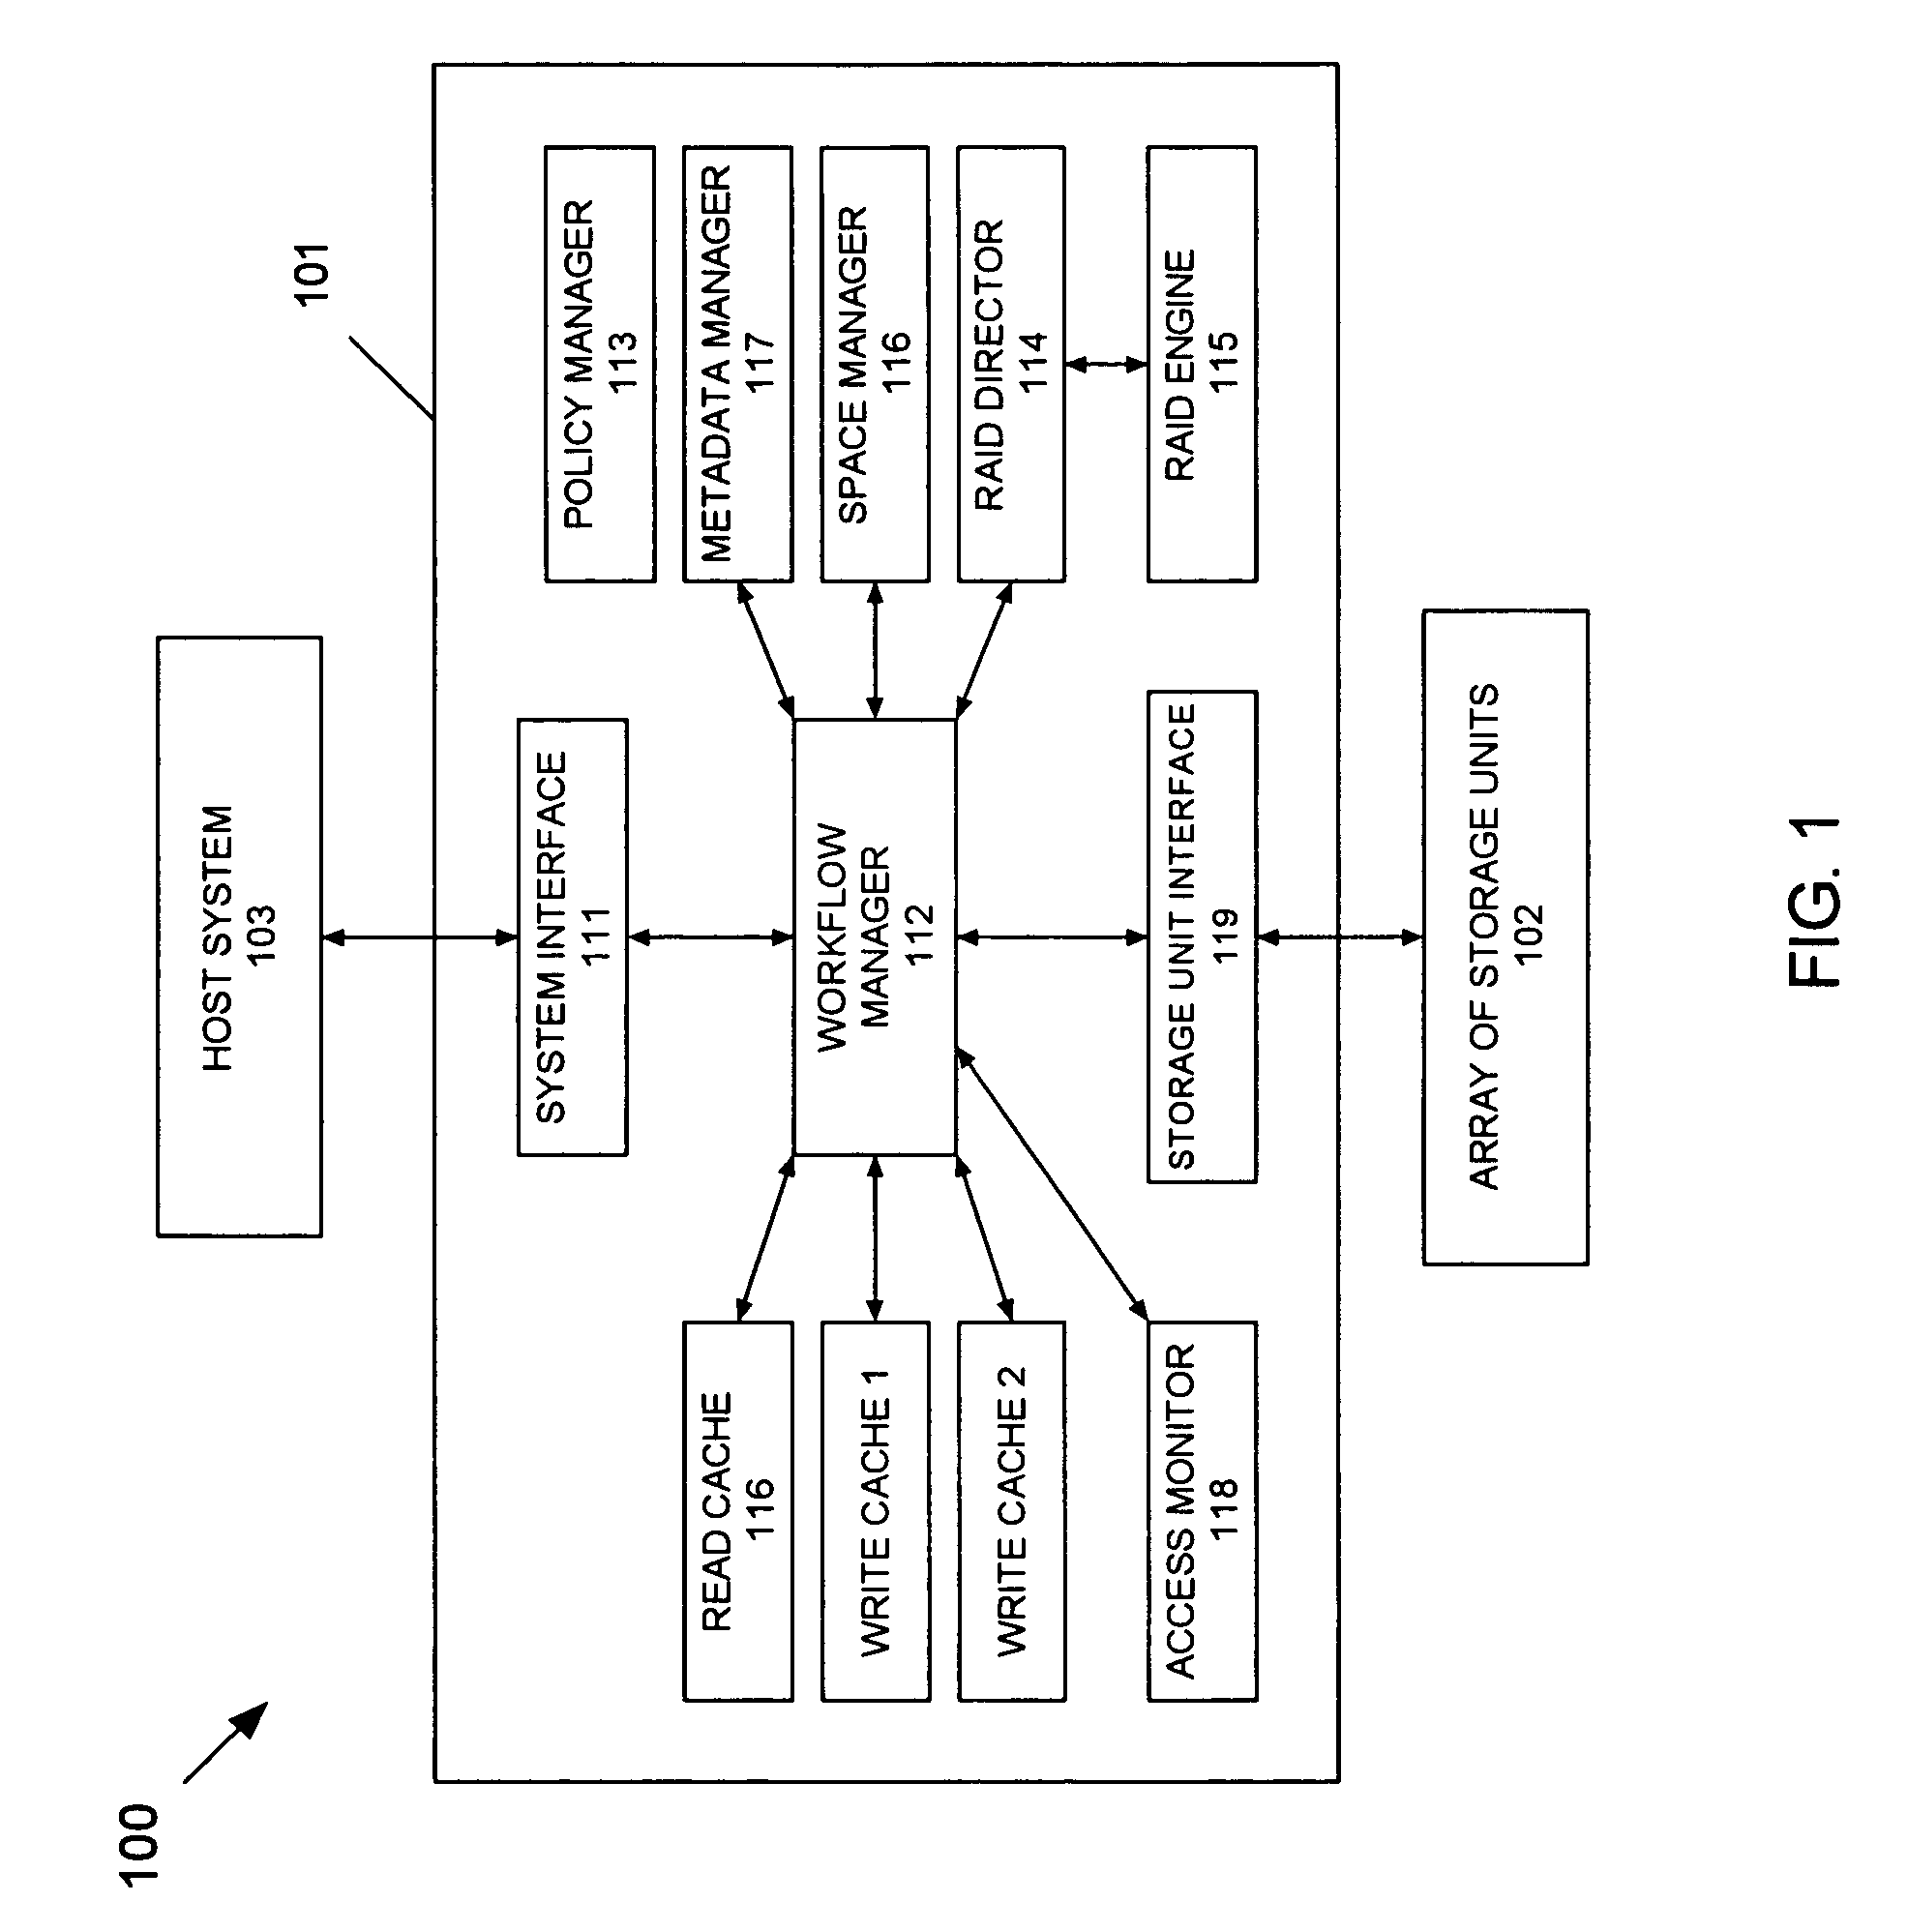 Policy-driven file system with integrated RAID functionality